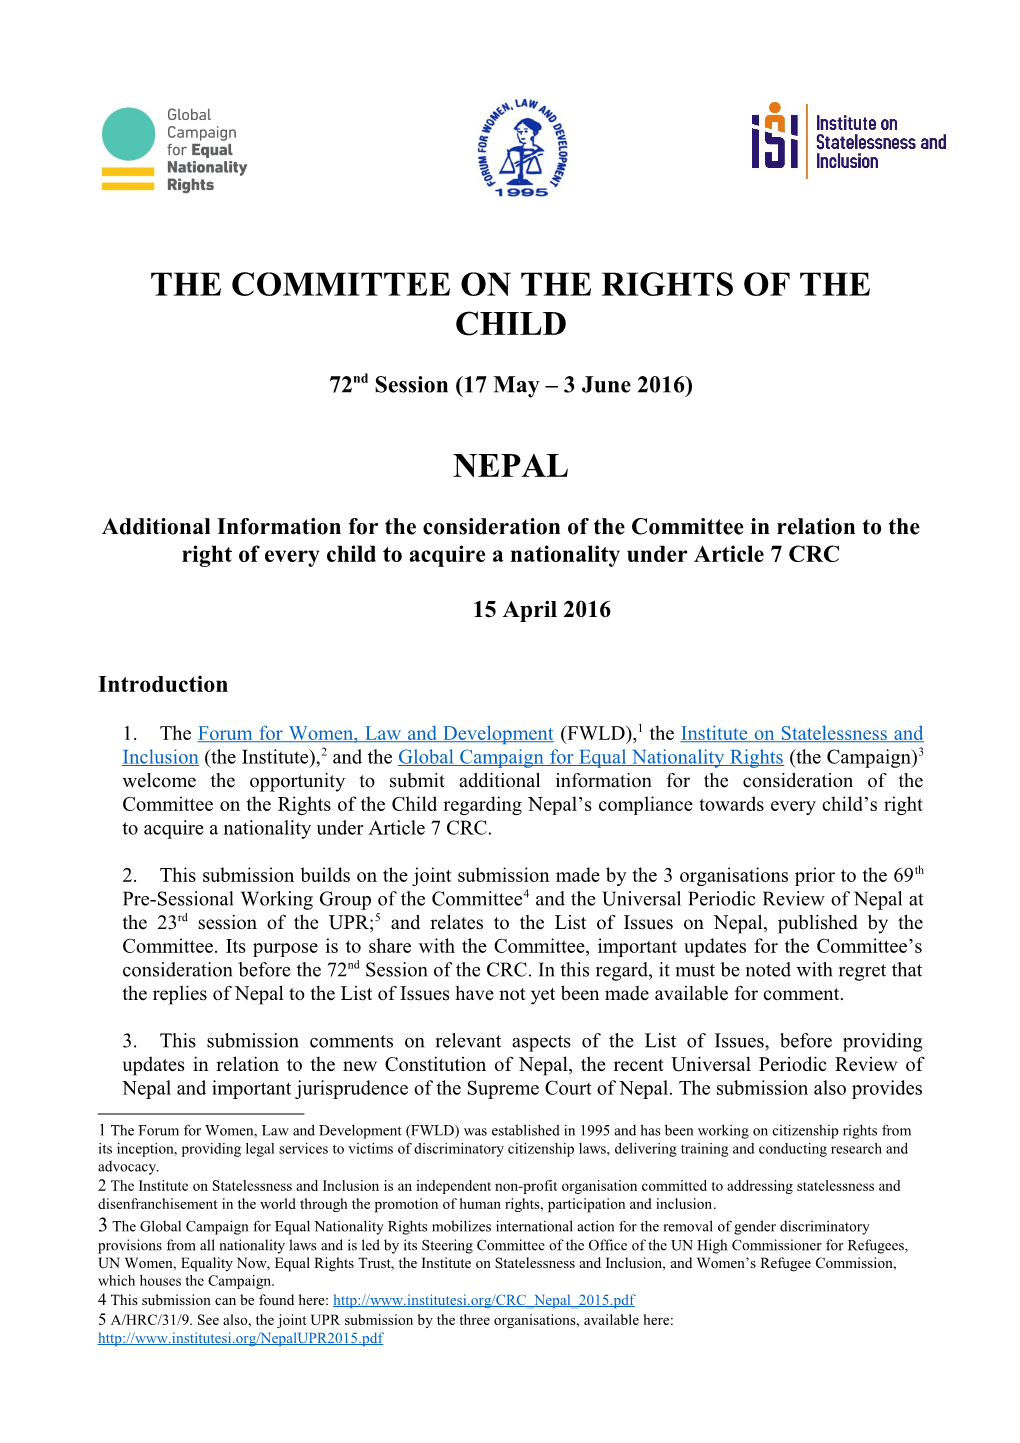 The Committee on the Rights of the Child